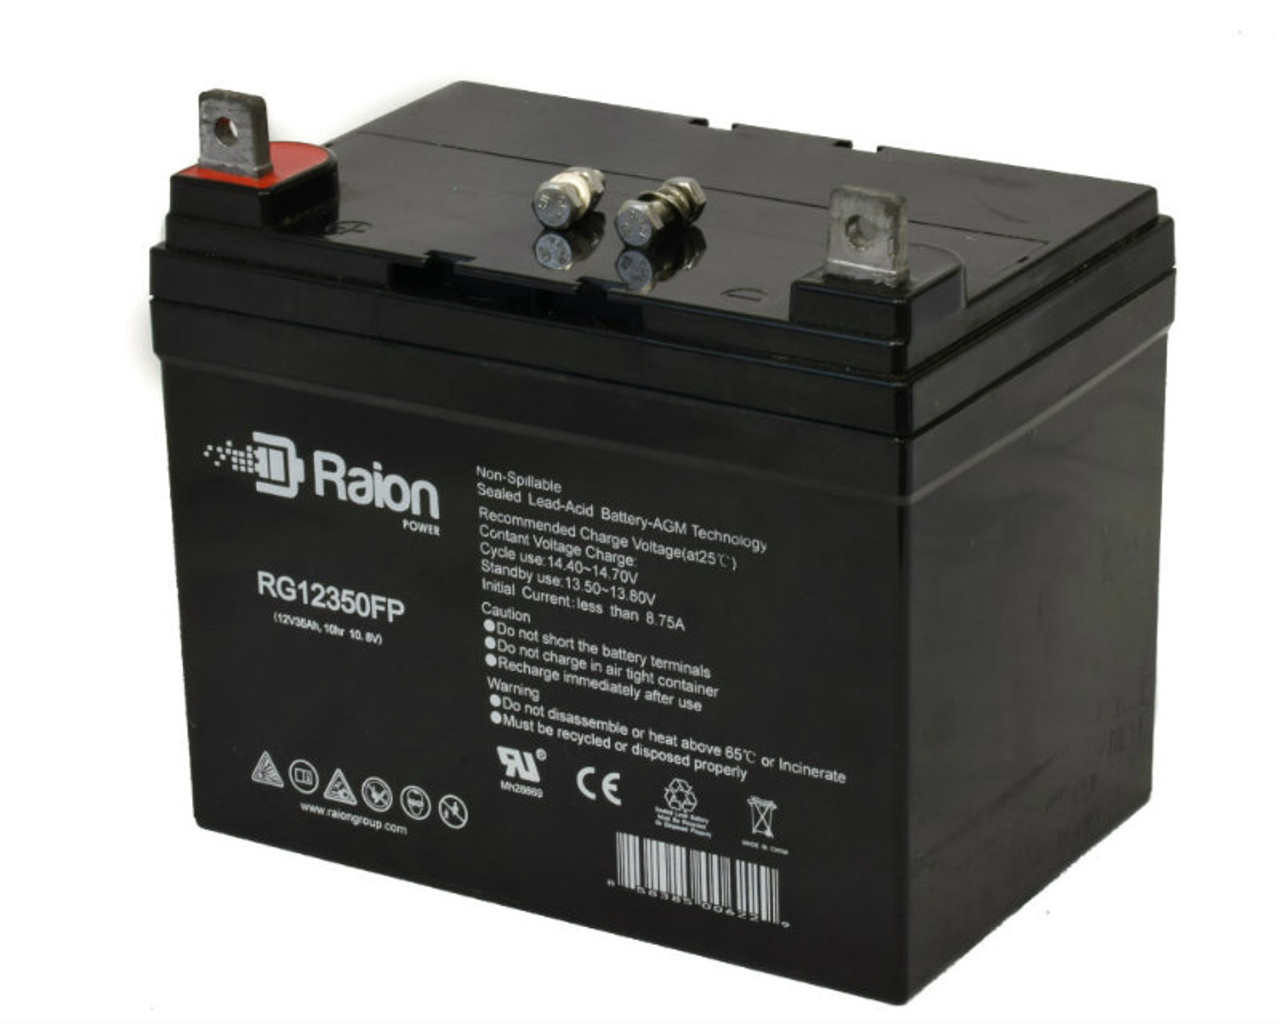 Raion Power Replacement 12V 35Ah RG12350FP Battery for Speedex Tractor 1640M